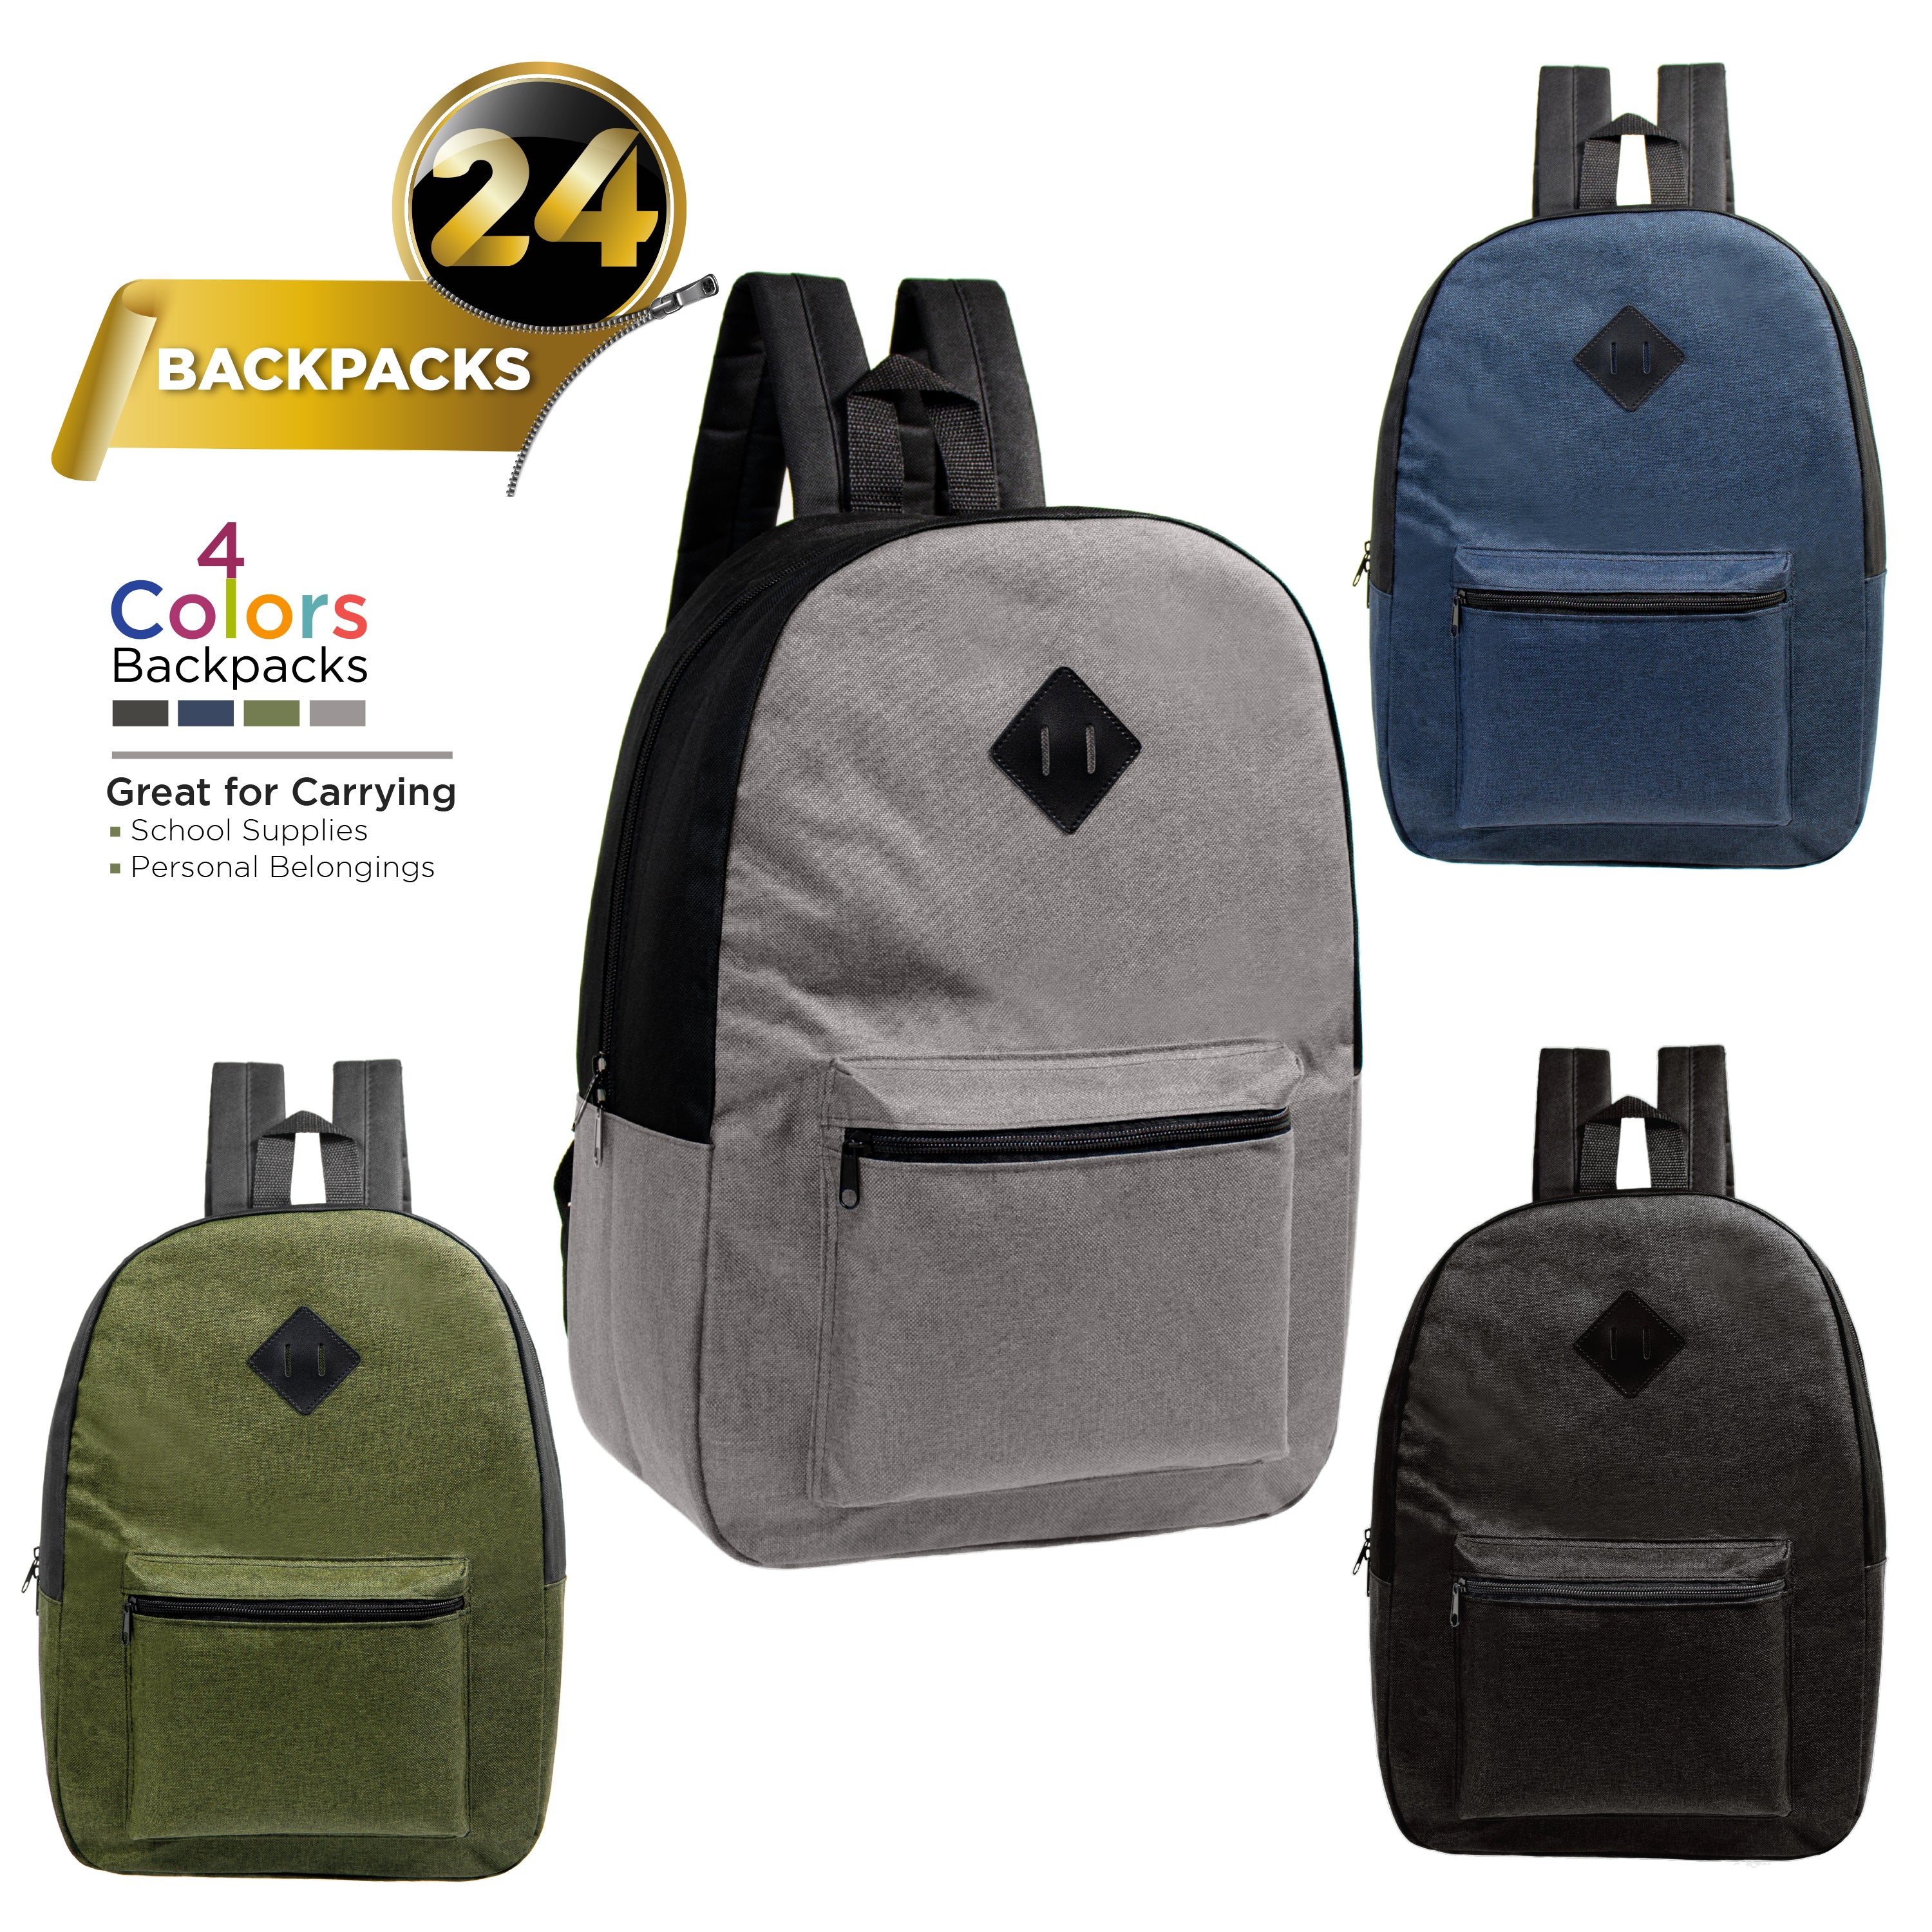 17" Kids Basic Wholesale Backpack in Assorted 4 Colors Diamond Patch - Bulk Case of 24 Backpacks